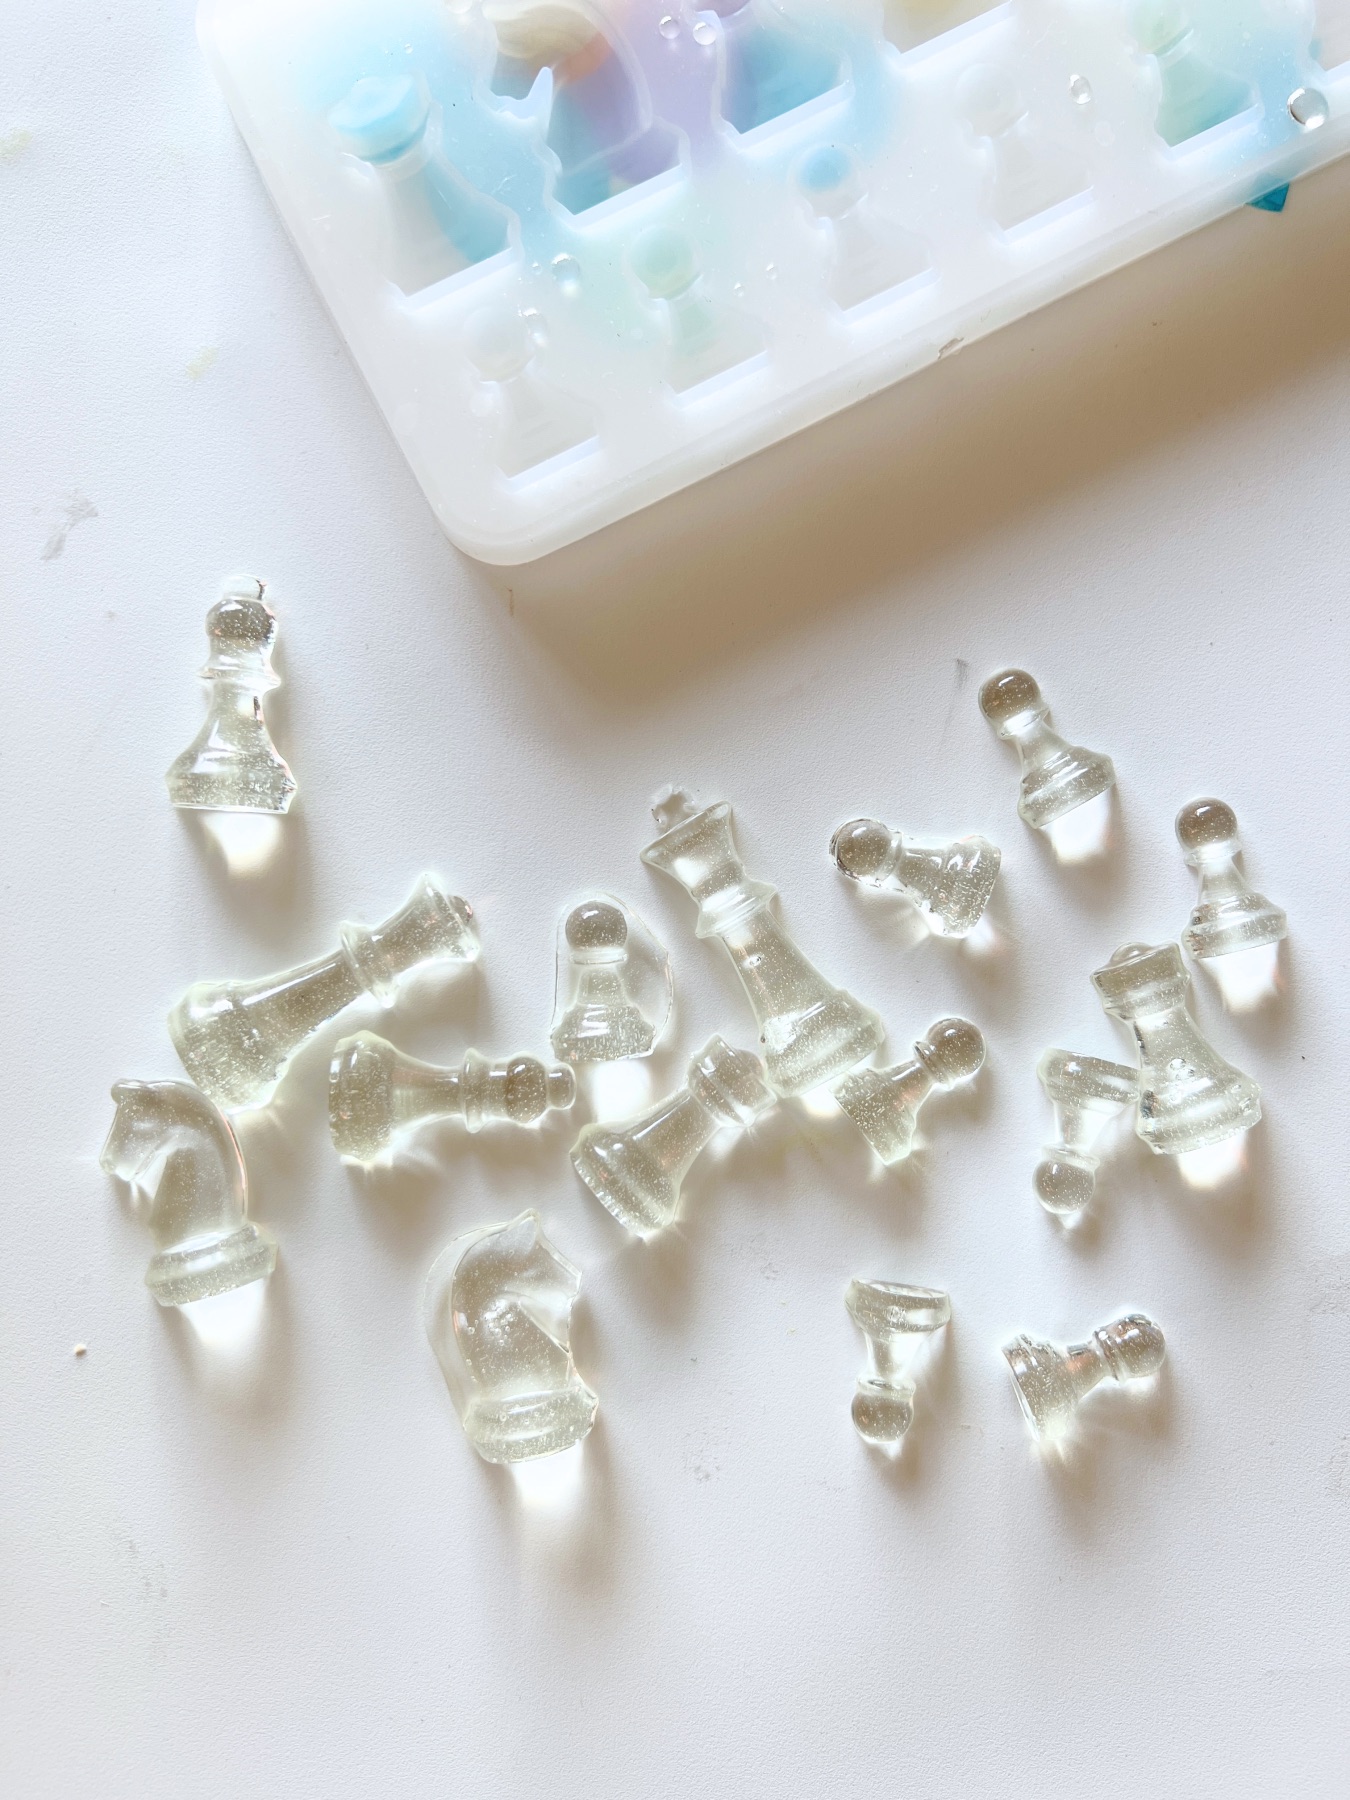 clear chess pieces removed from the mold